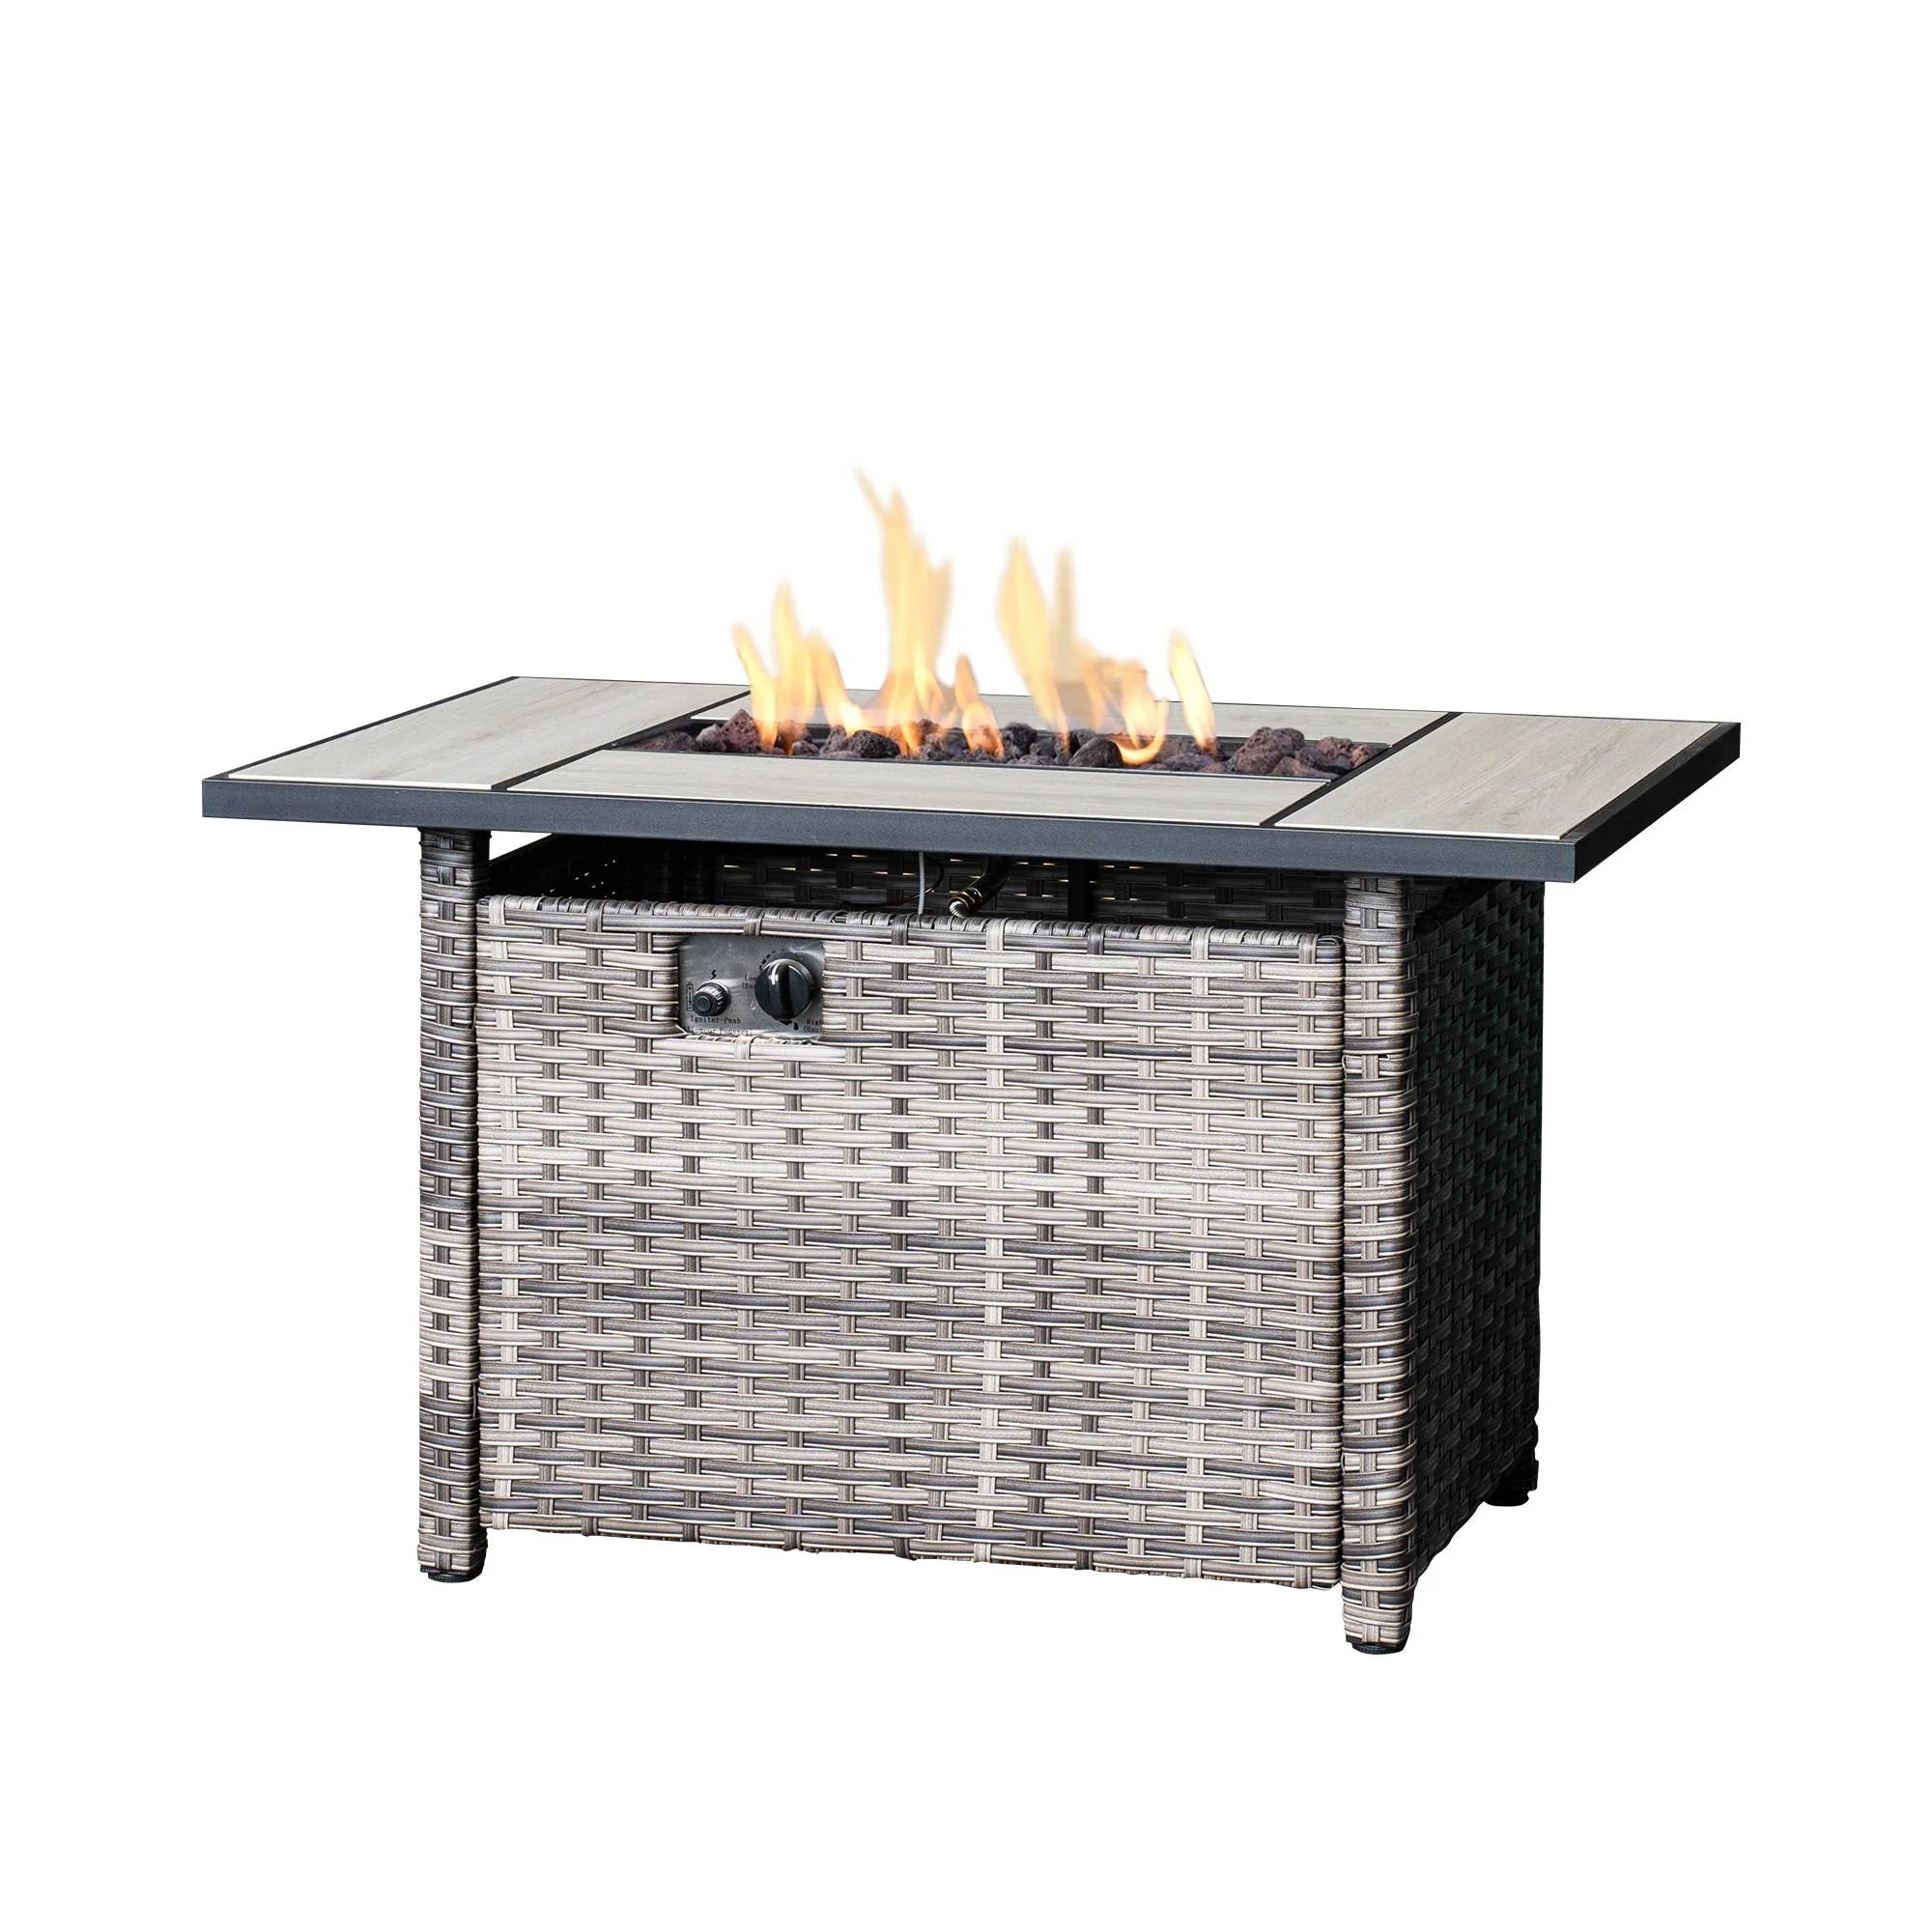 Ovios Rectangle Patio Propane Outdoor 42.12'' Fire Pit Table with Lid - $200